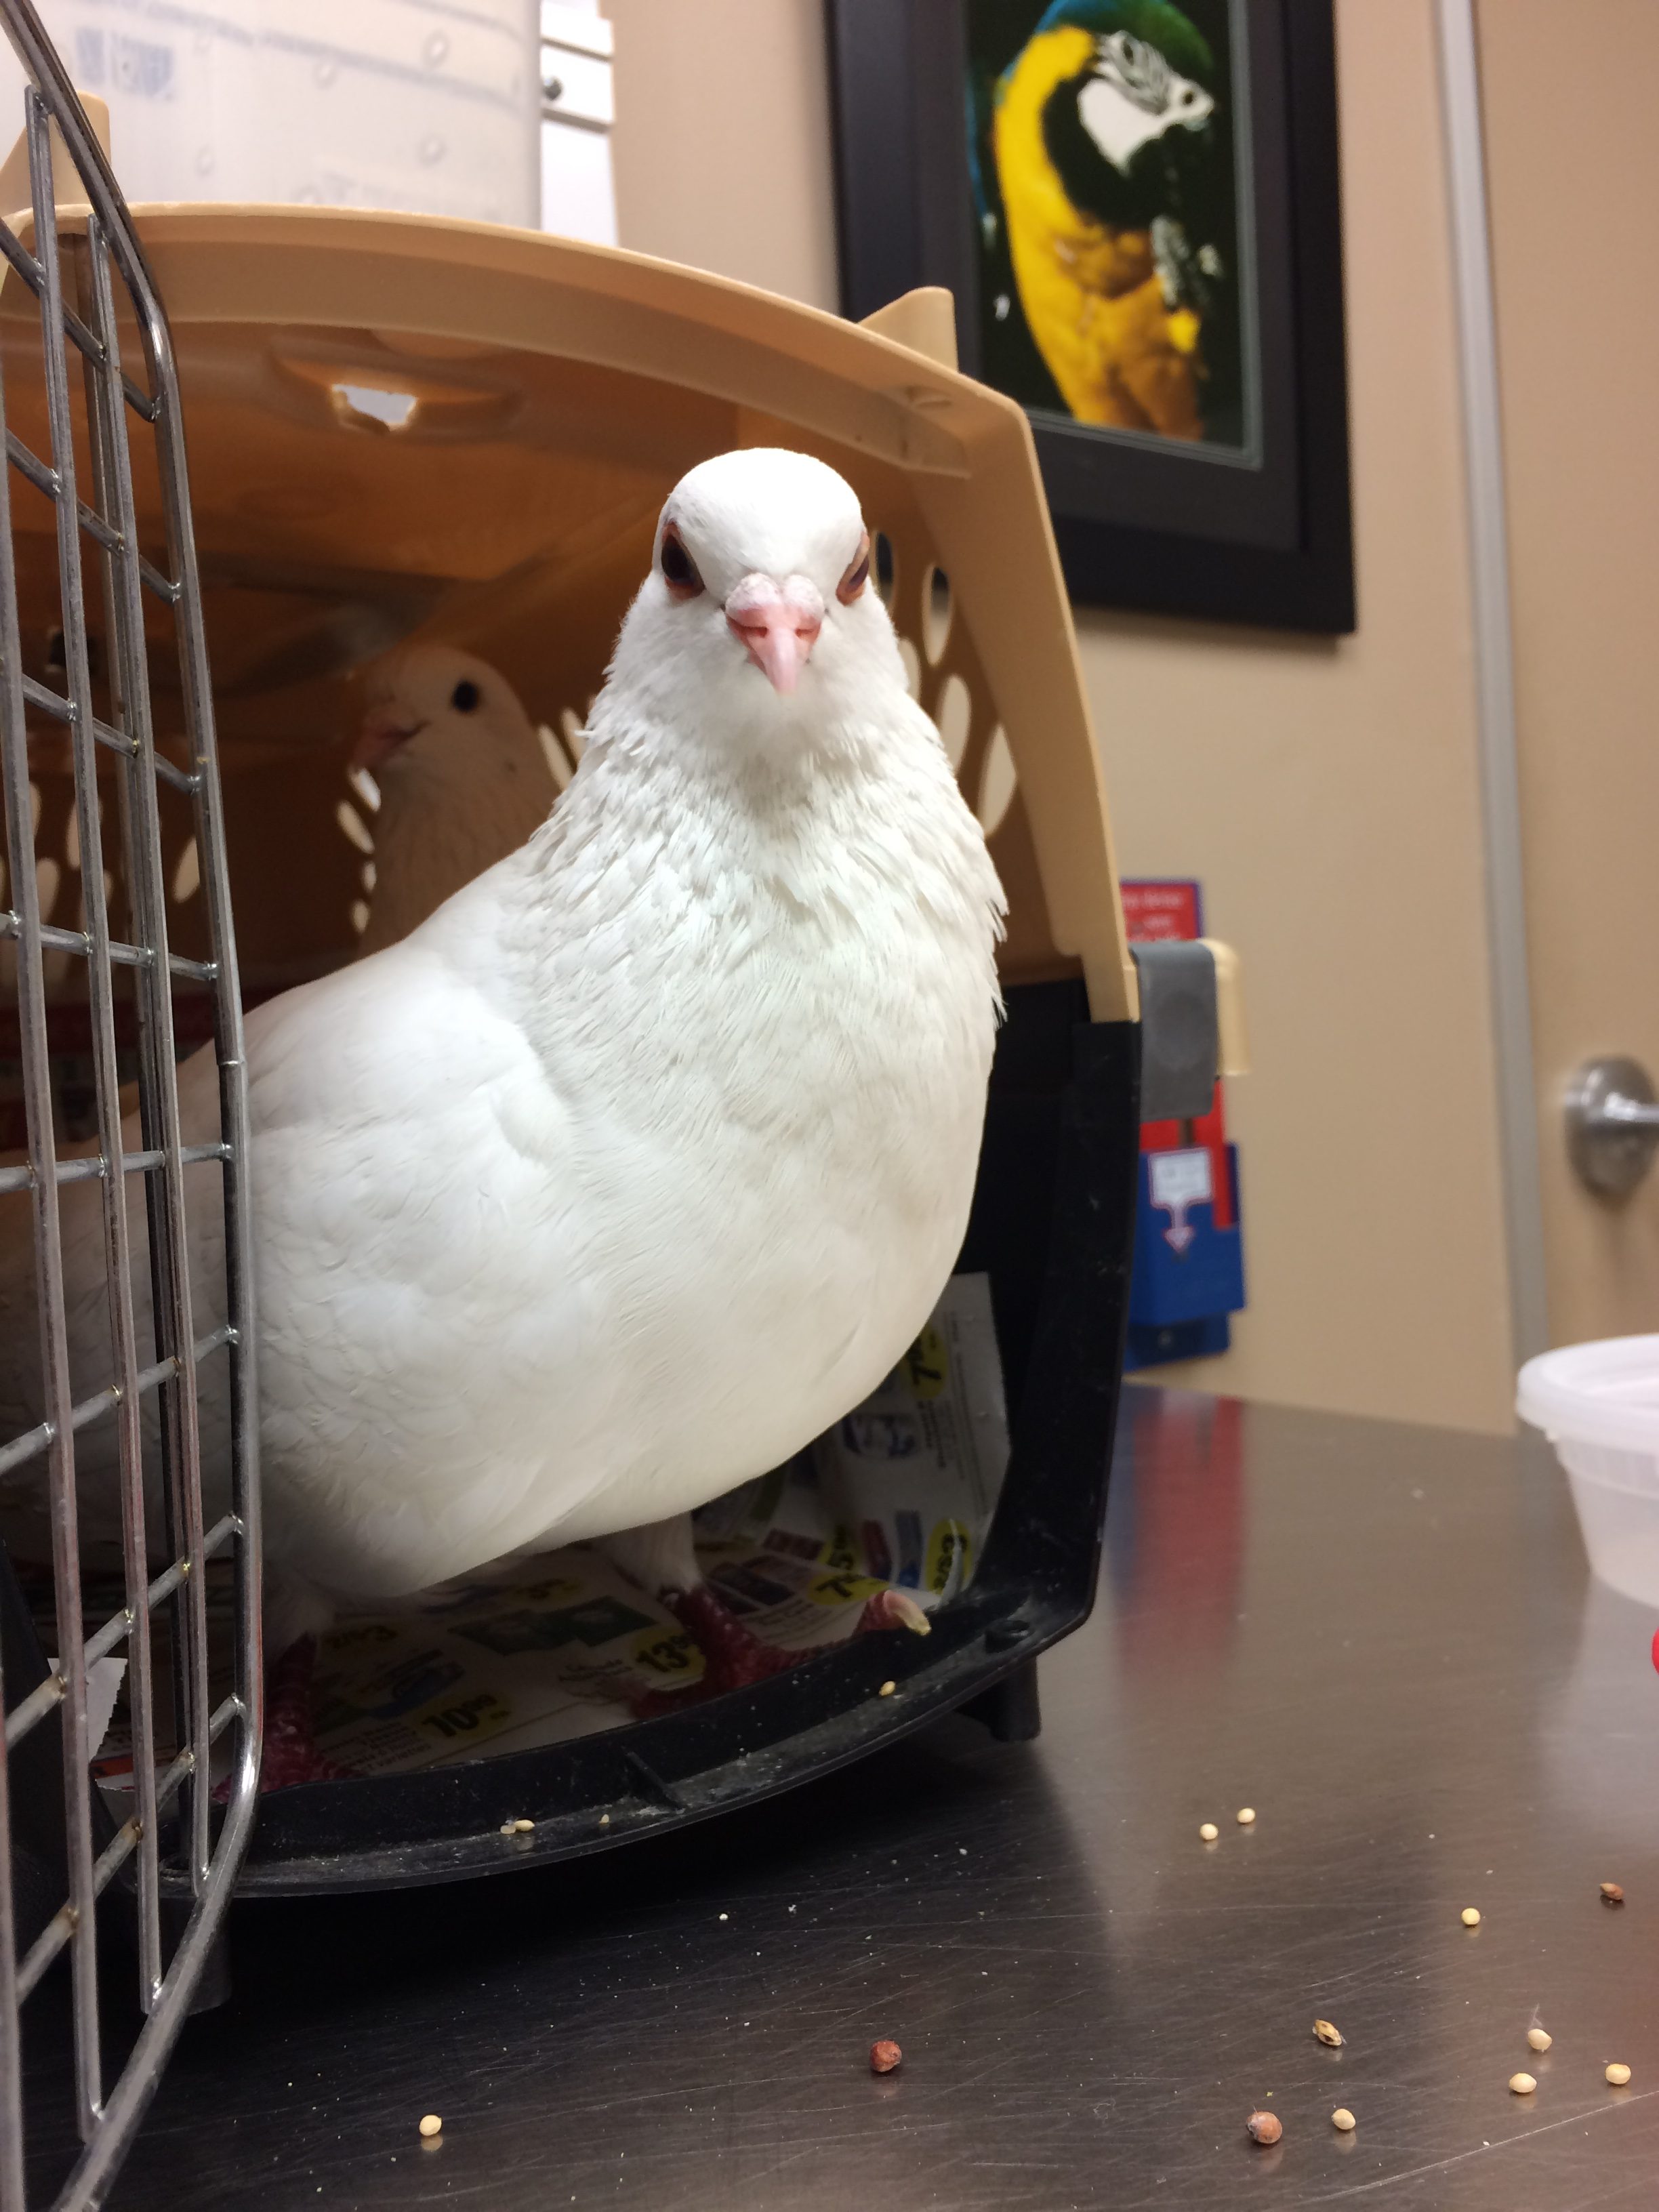 White King pigeon stepping out of a pet carrier onto vet table